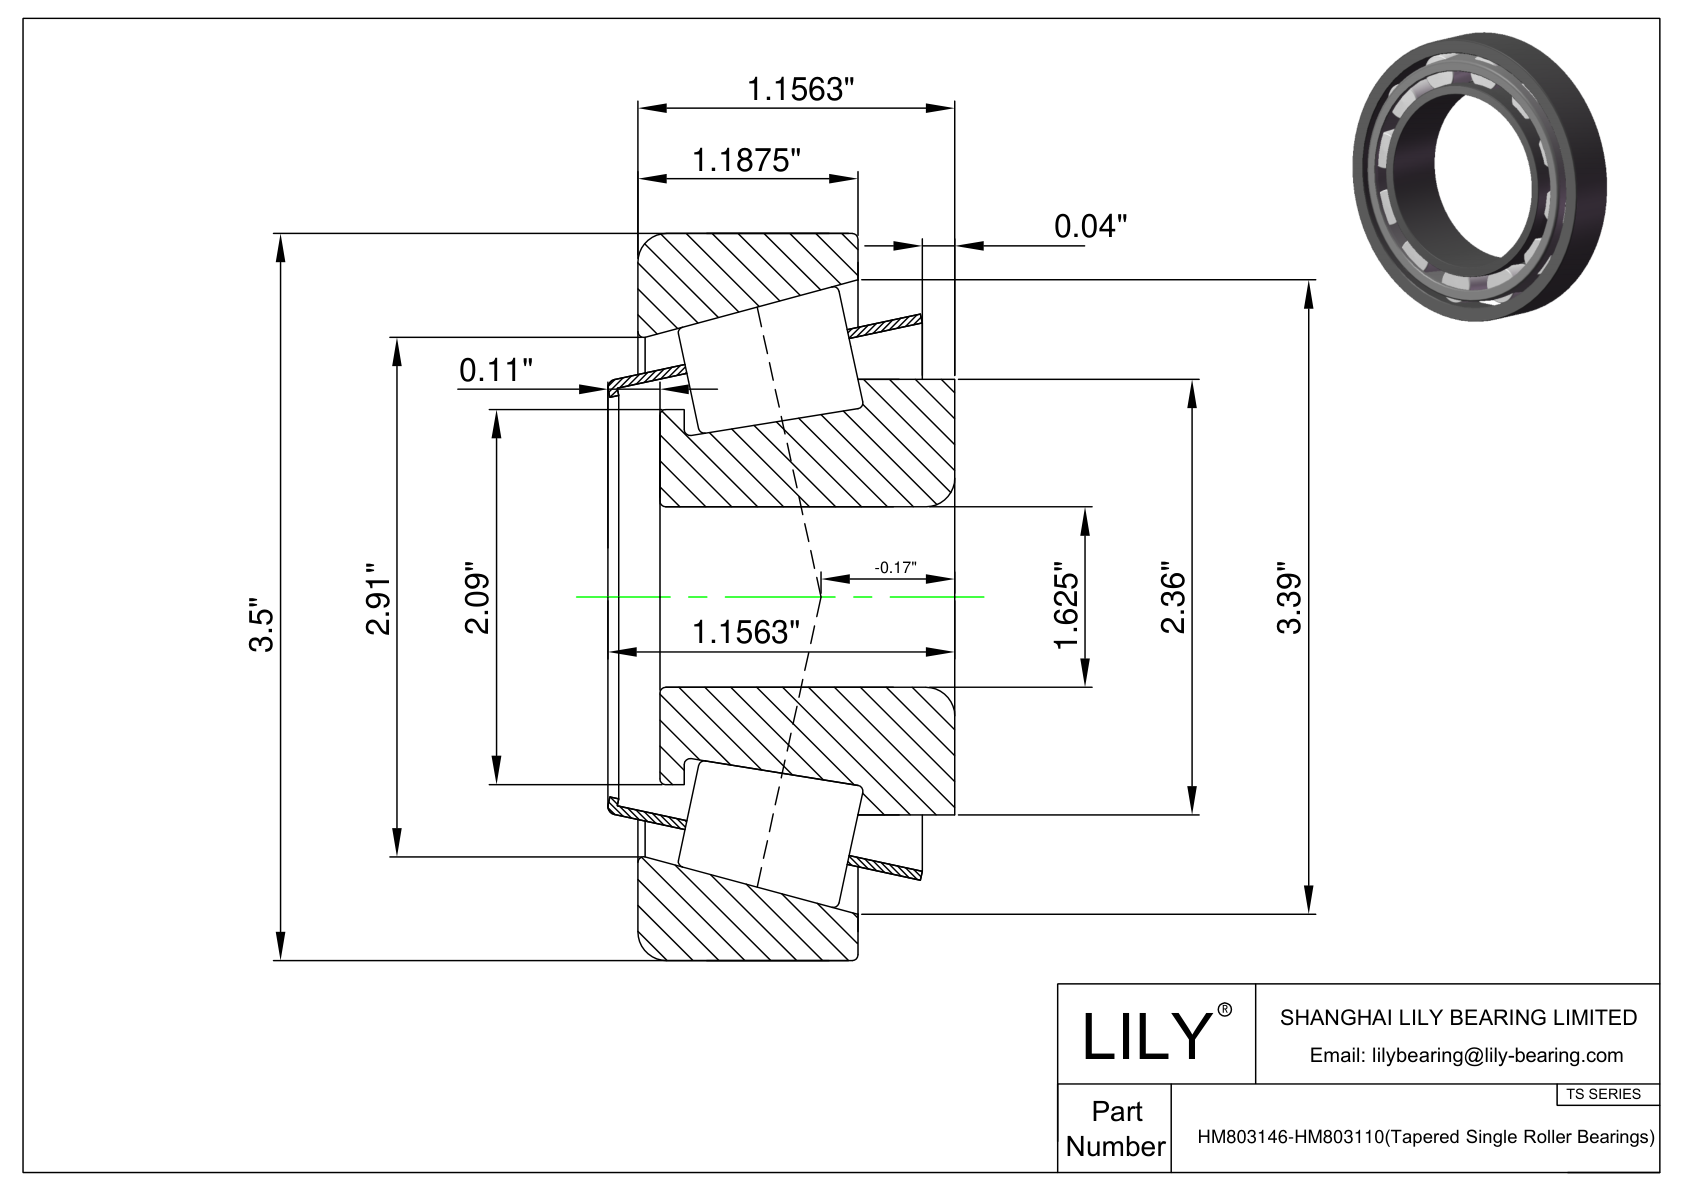 HM803146-HM803110 TS (Tapered Single Roller Bearings) (Imperial) cad drawing